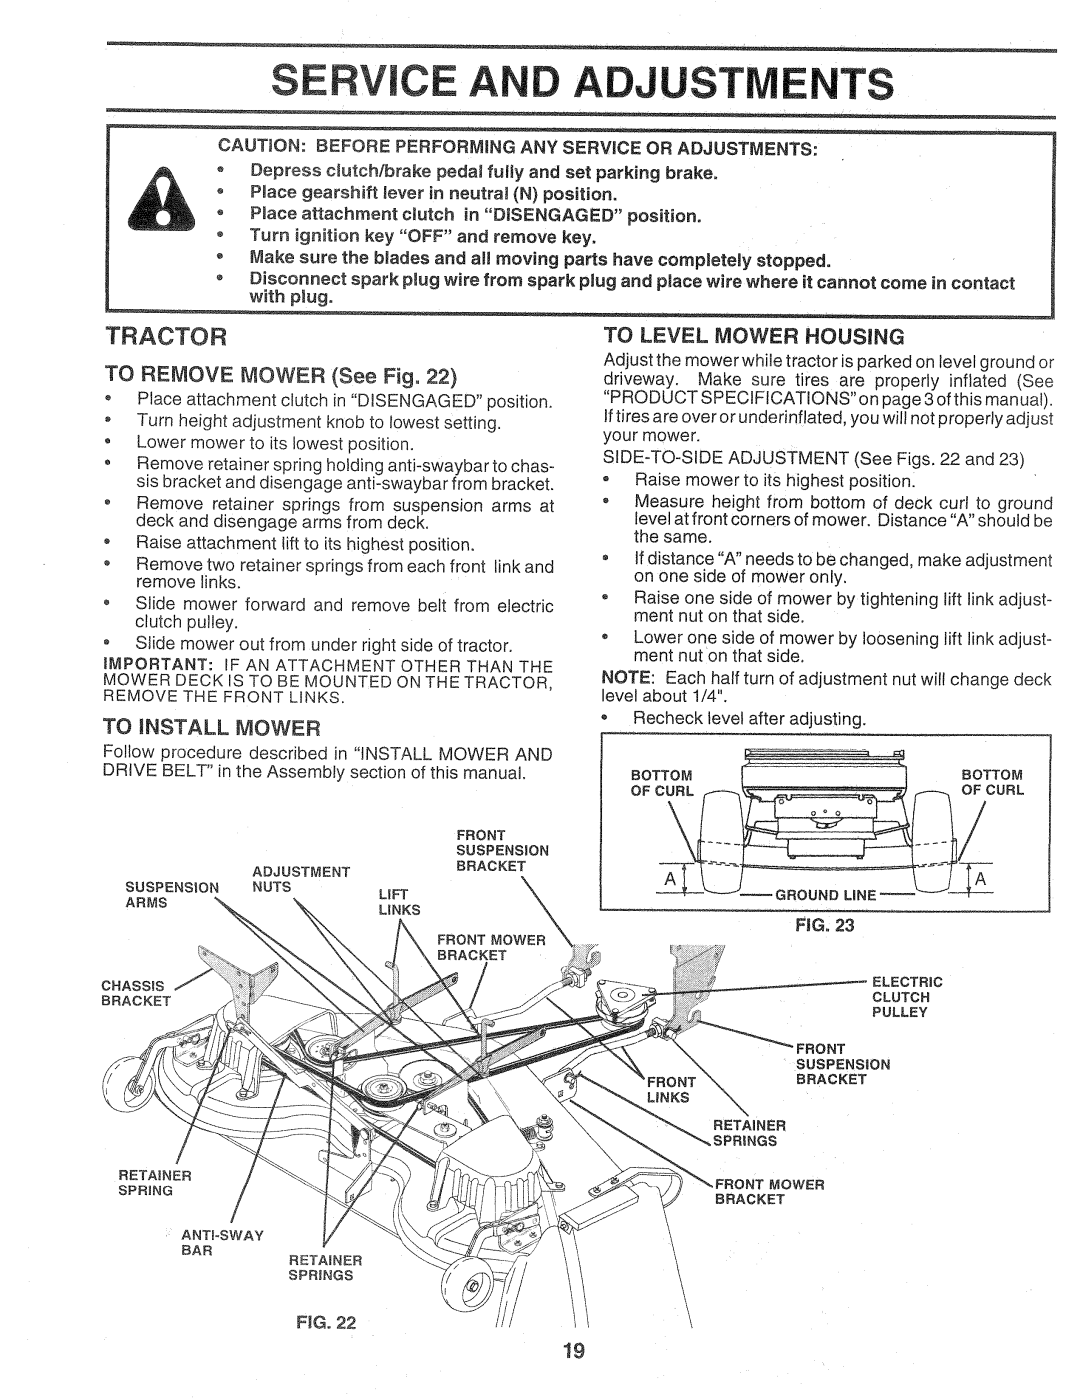 Sears 917.257720 owner manual Service Adju Nts, Tractor, TO REMOVE MOWER See Fig, TO iNSTALL MOWER, To Level Mower Housing 